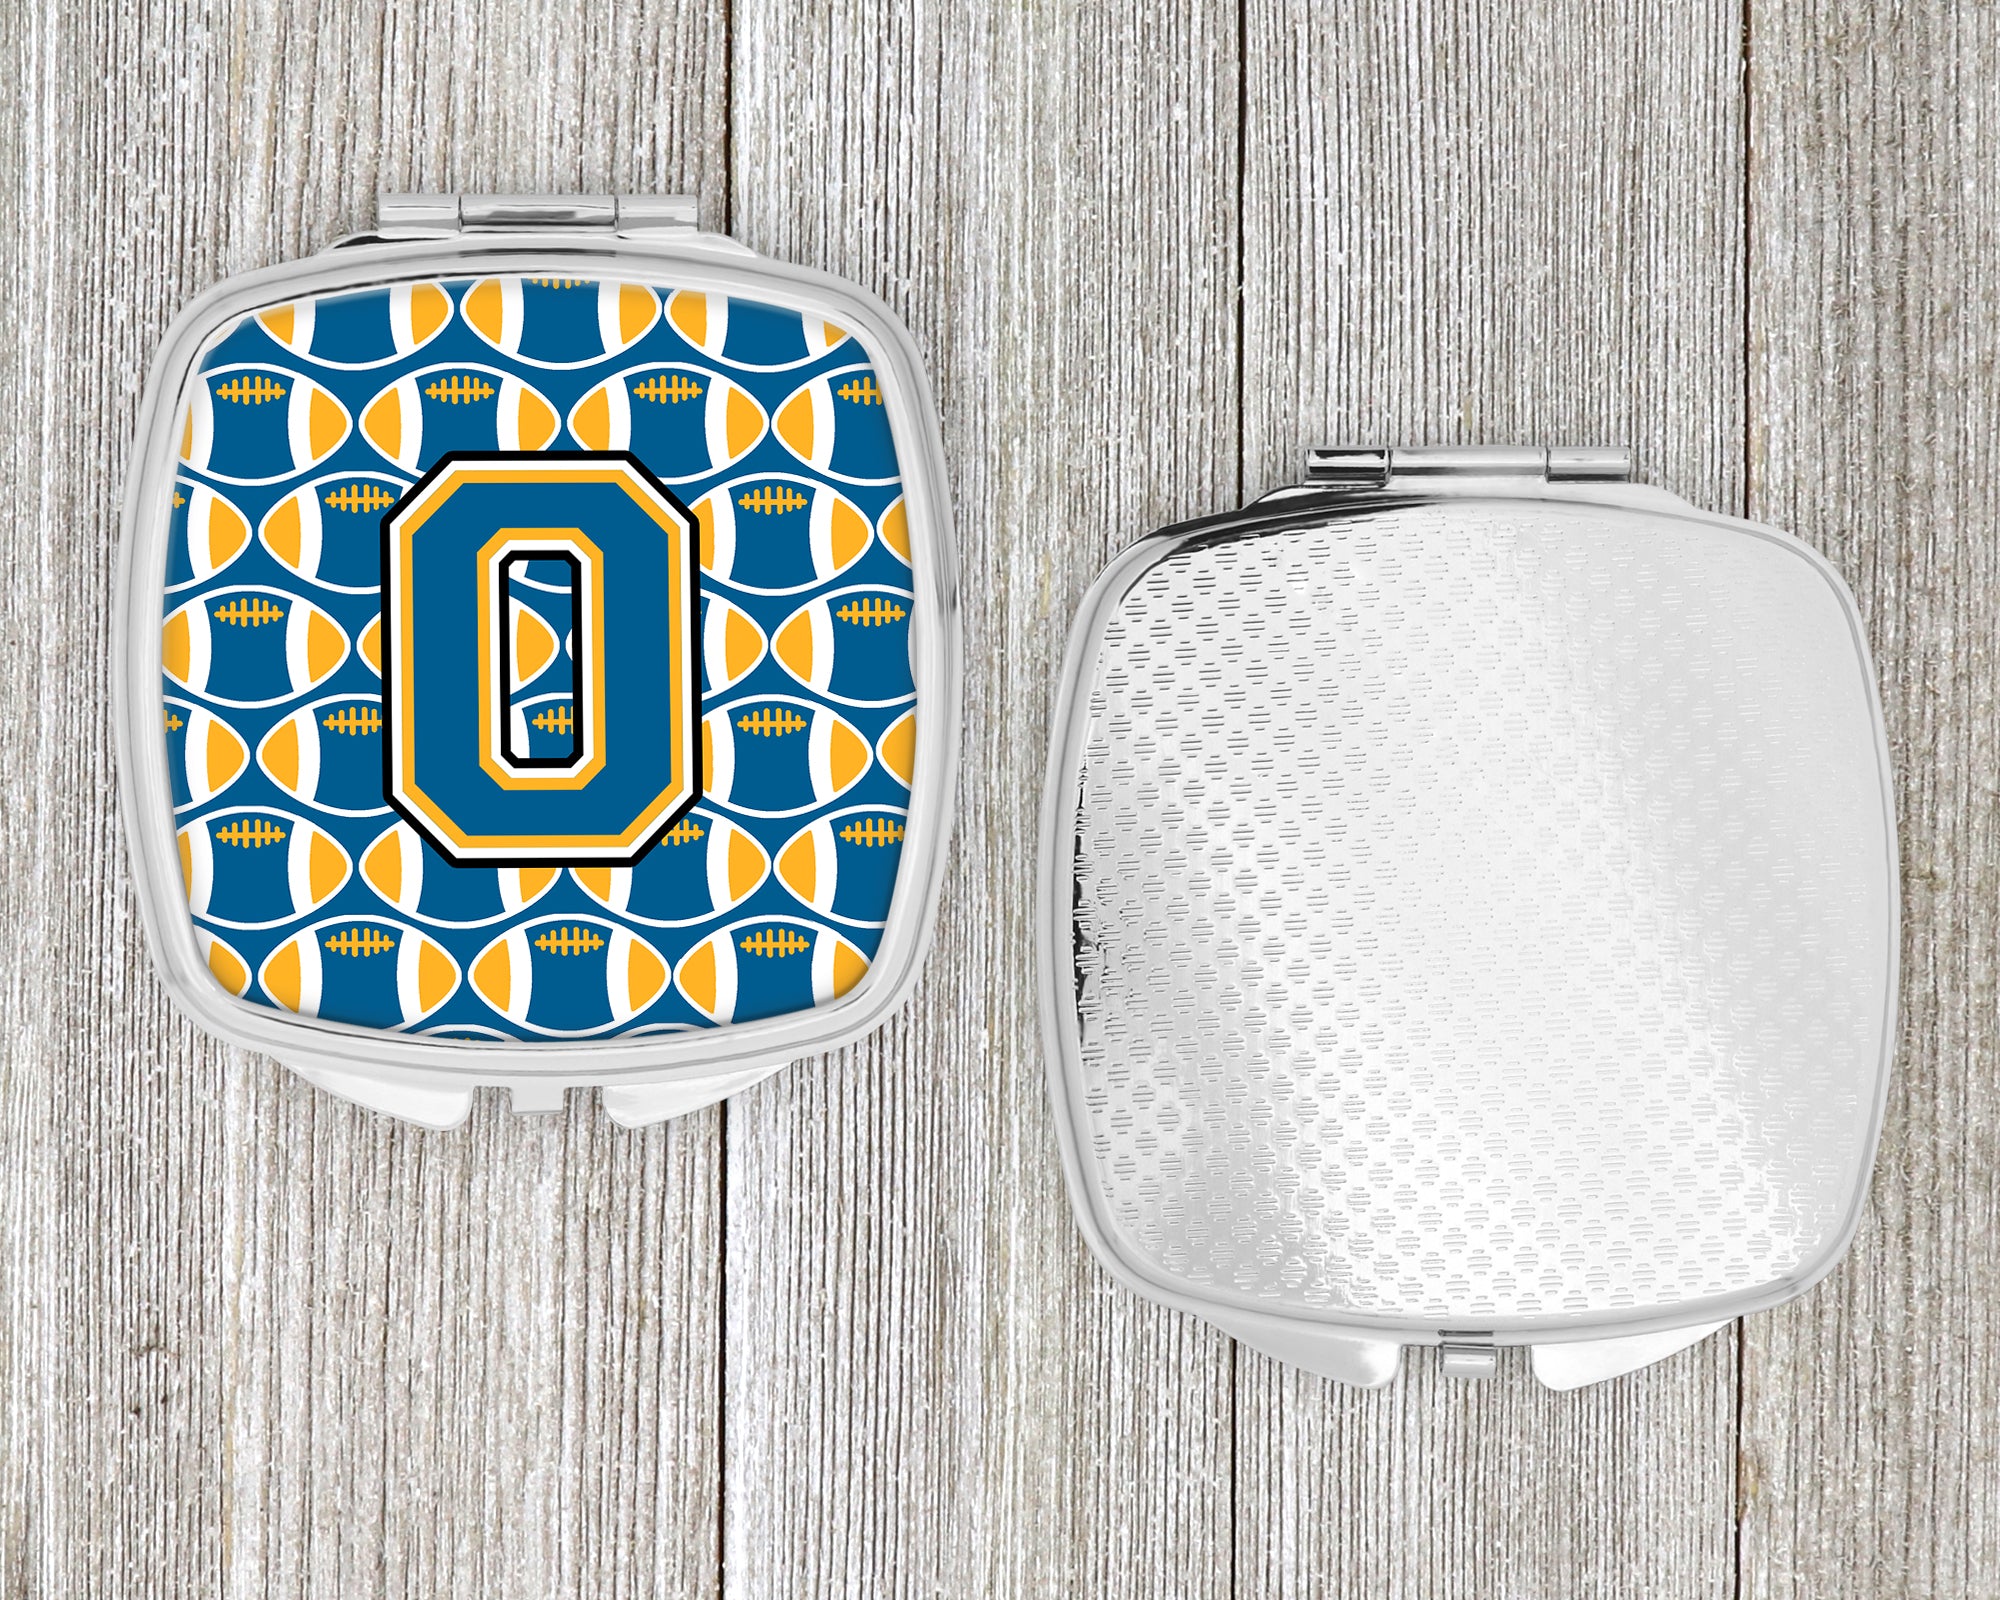 Letter O Football Blue and Gold Compact Mirror CJ1077-OSCM  the-store.com.